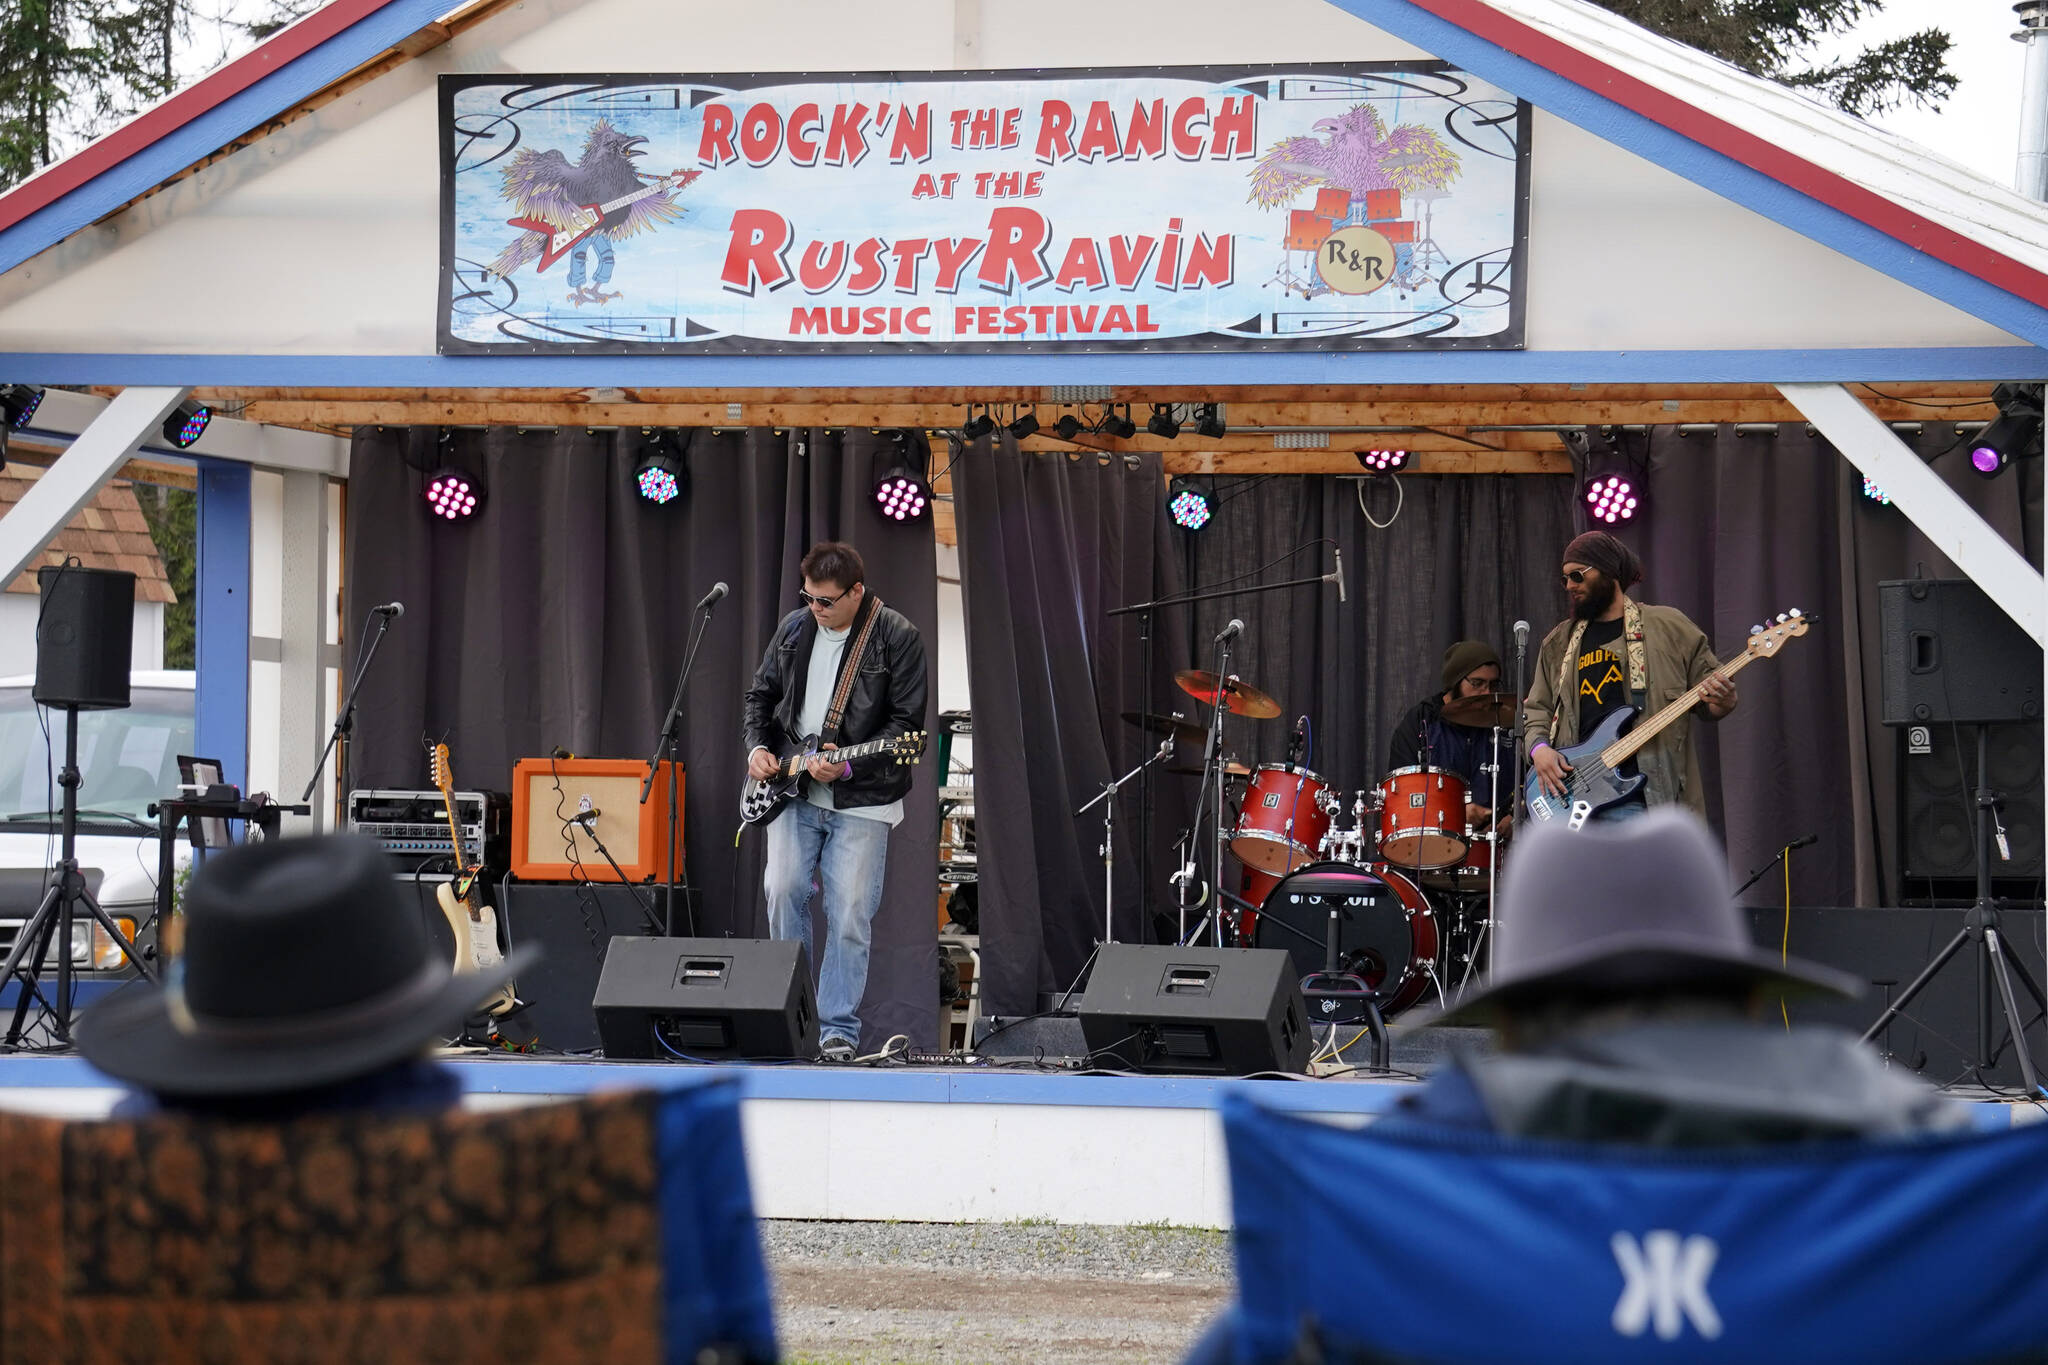 Gold Peak play the opening set of the Seventh Annual Rock’N the Ranch at the Rusty Ravin on Friday, July 7, 2023, at Rusty Ravin Plant Ranch in Kenai, Alaska. (Jake Dye/Peninsula Clarion)